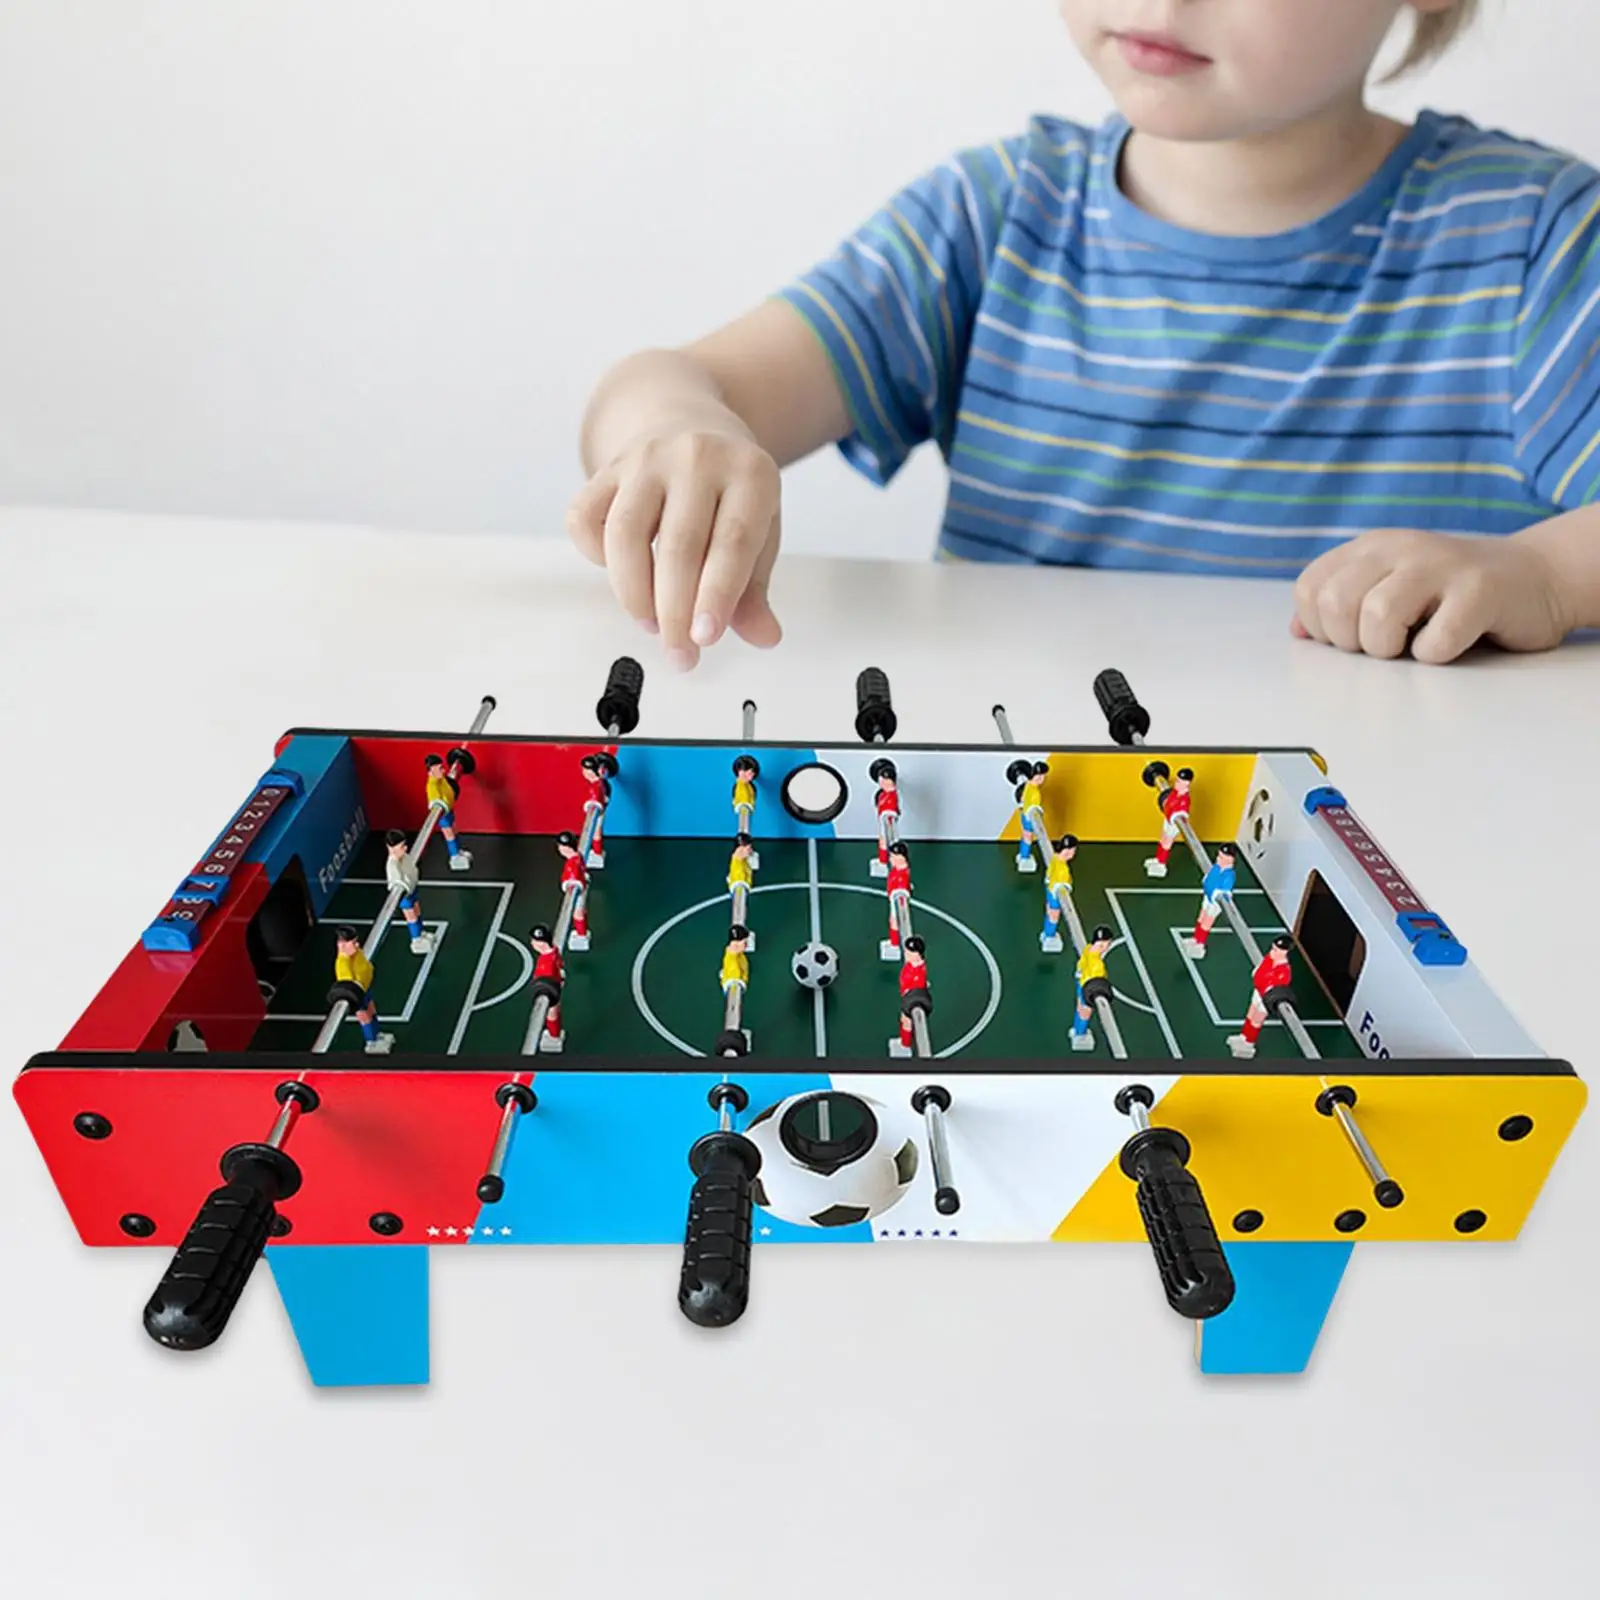 Small Foosball Table Educational Toy Interactive Toy Table Top Soccer Game Table Football Game for Holiday Gifts Family Night